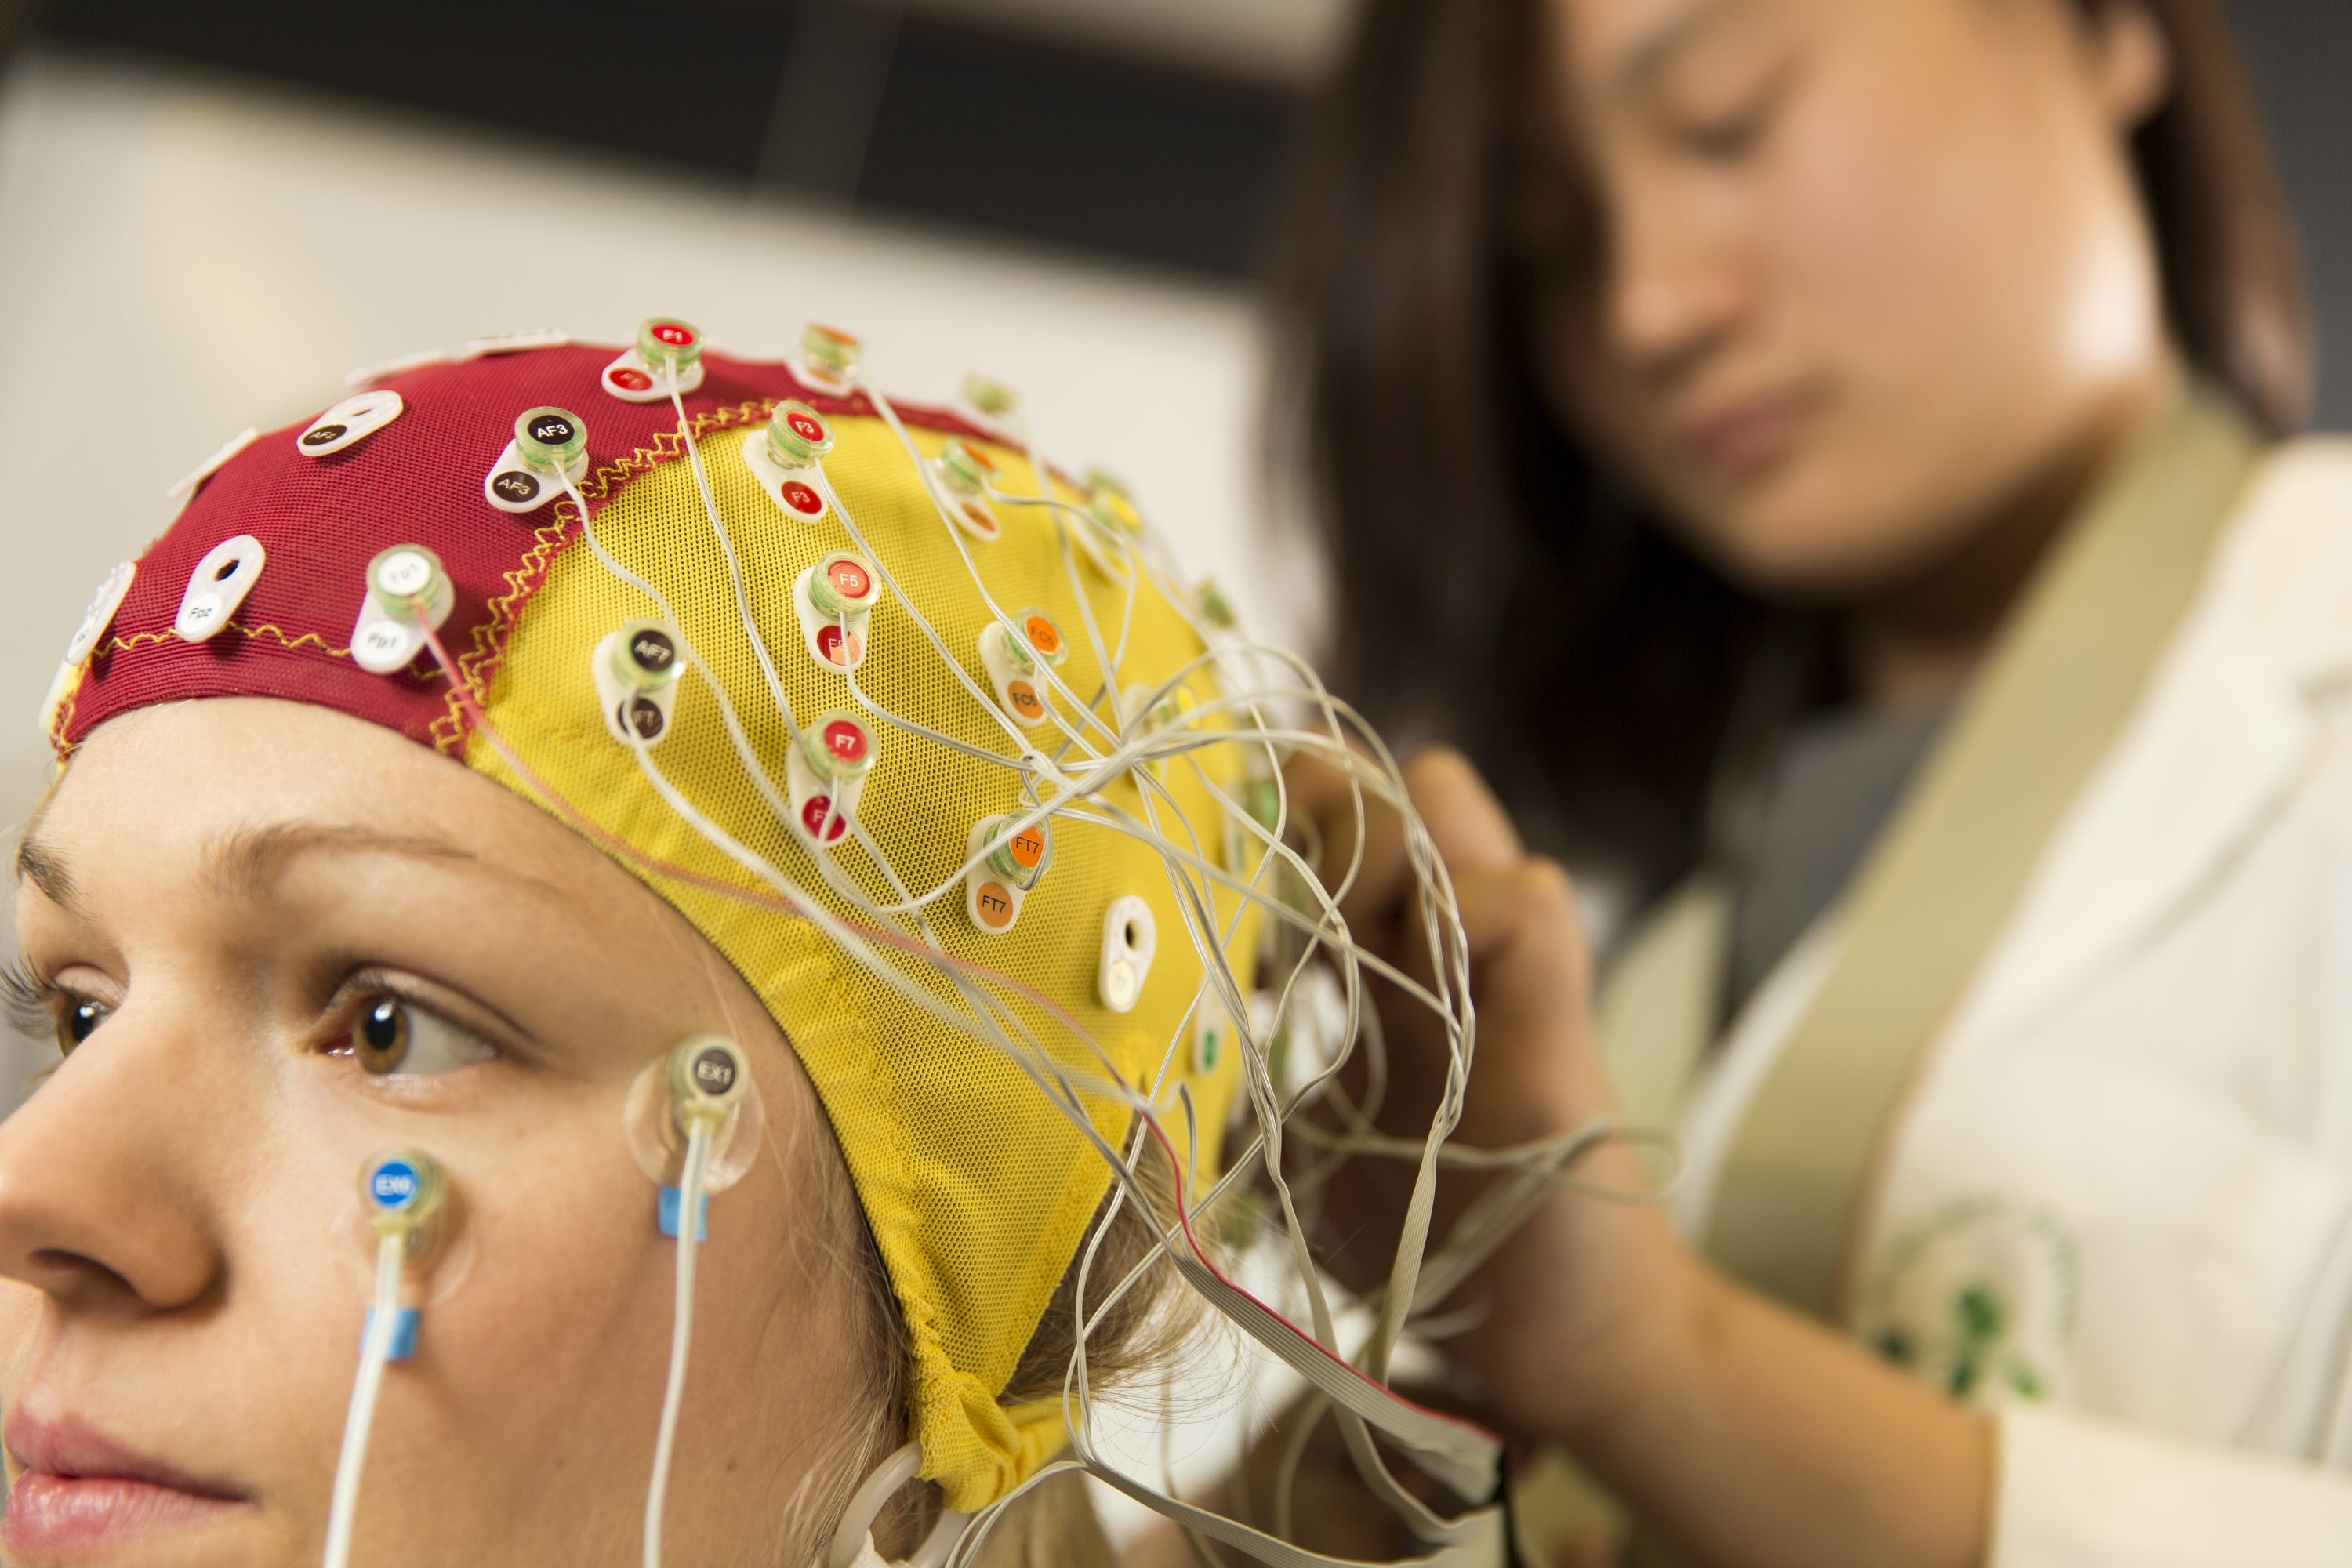 Subject fitted with a Electroencephalogram (EEG) cap to see the fine details of when brain activity occurs.